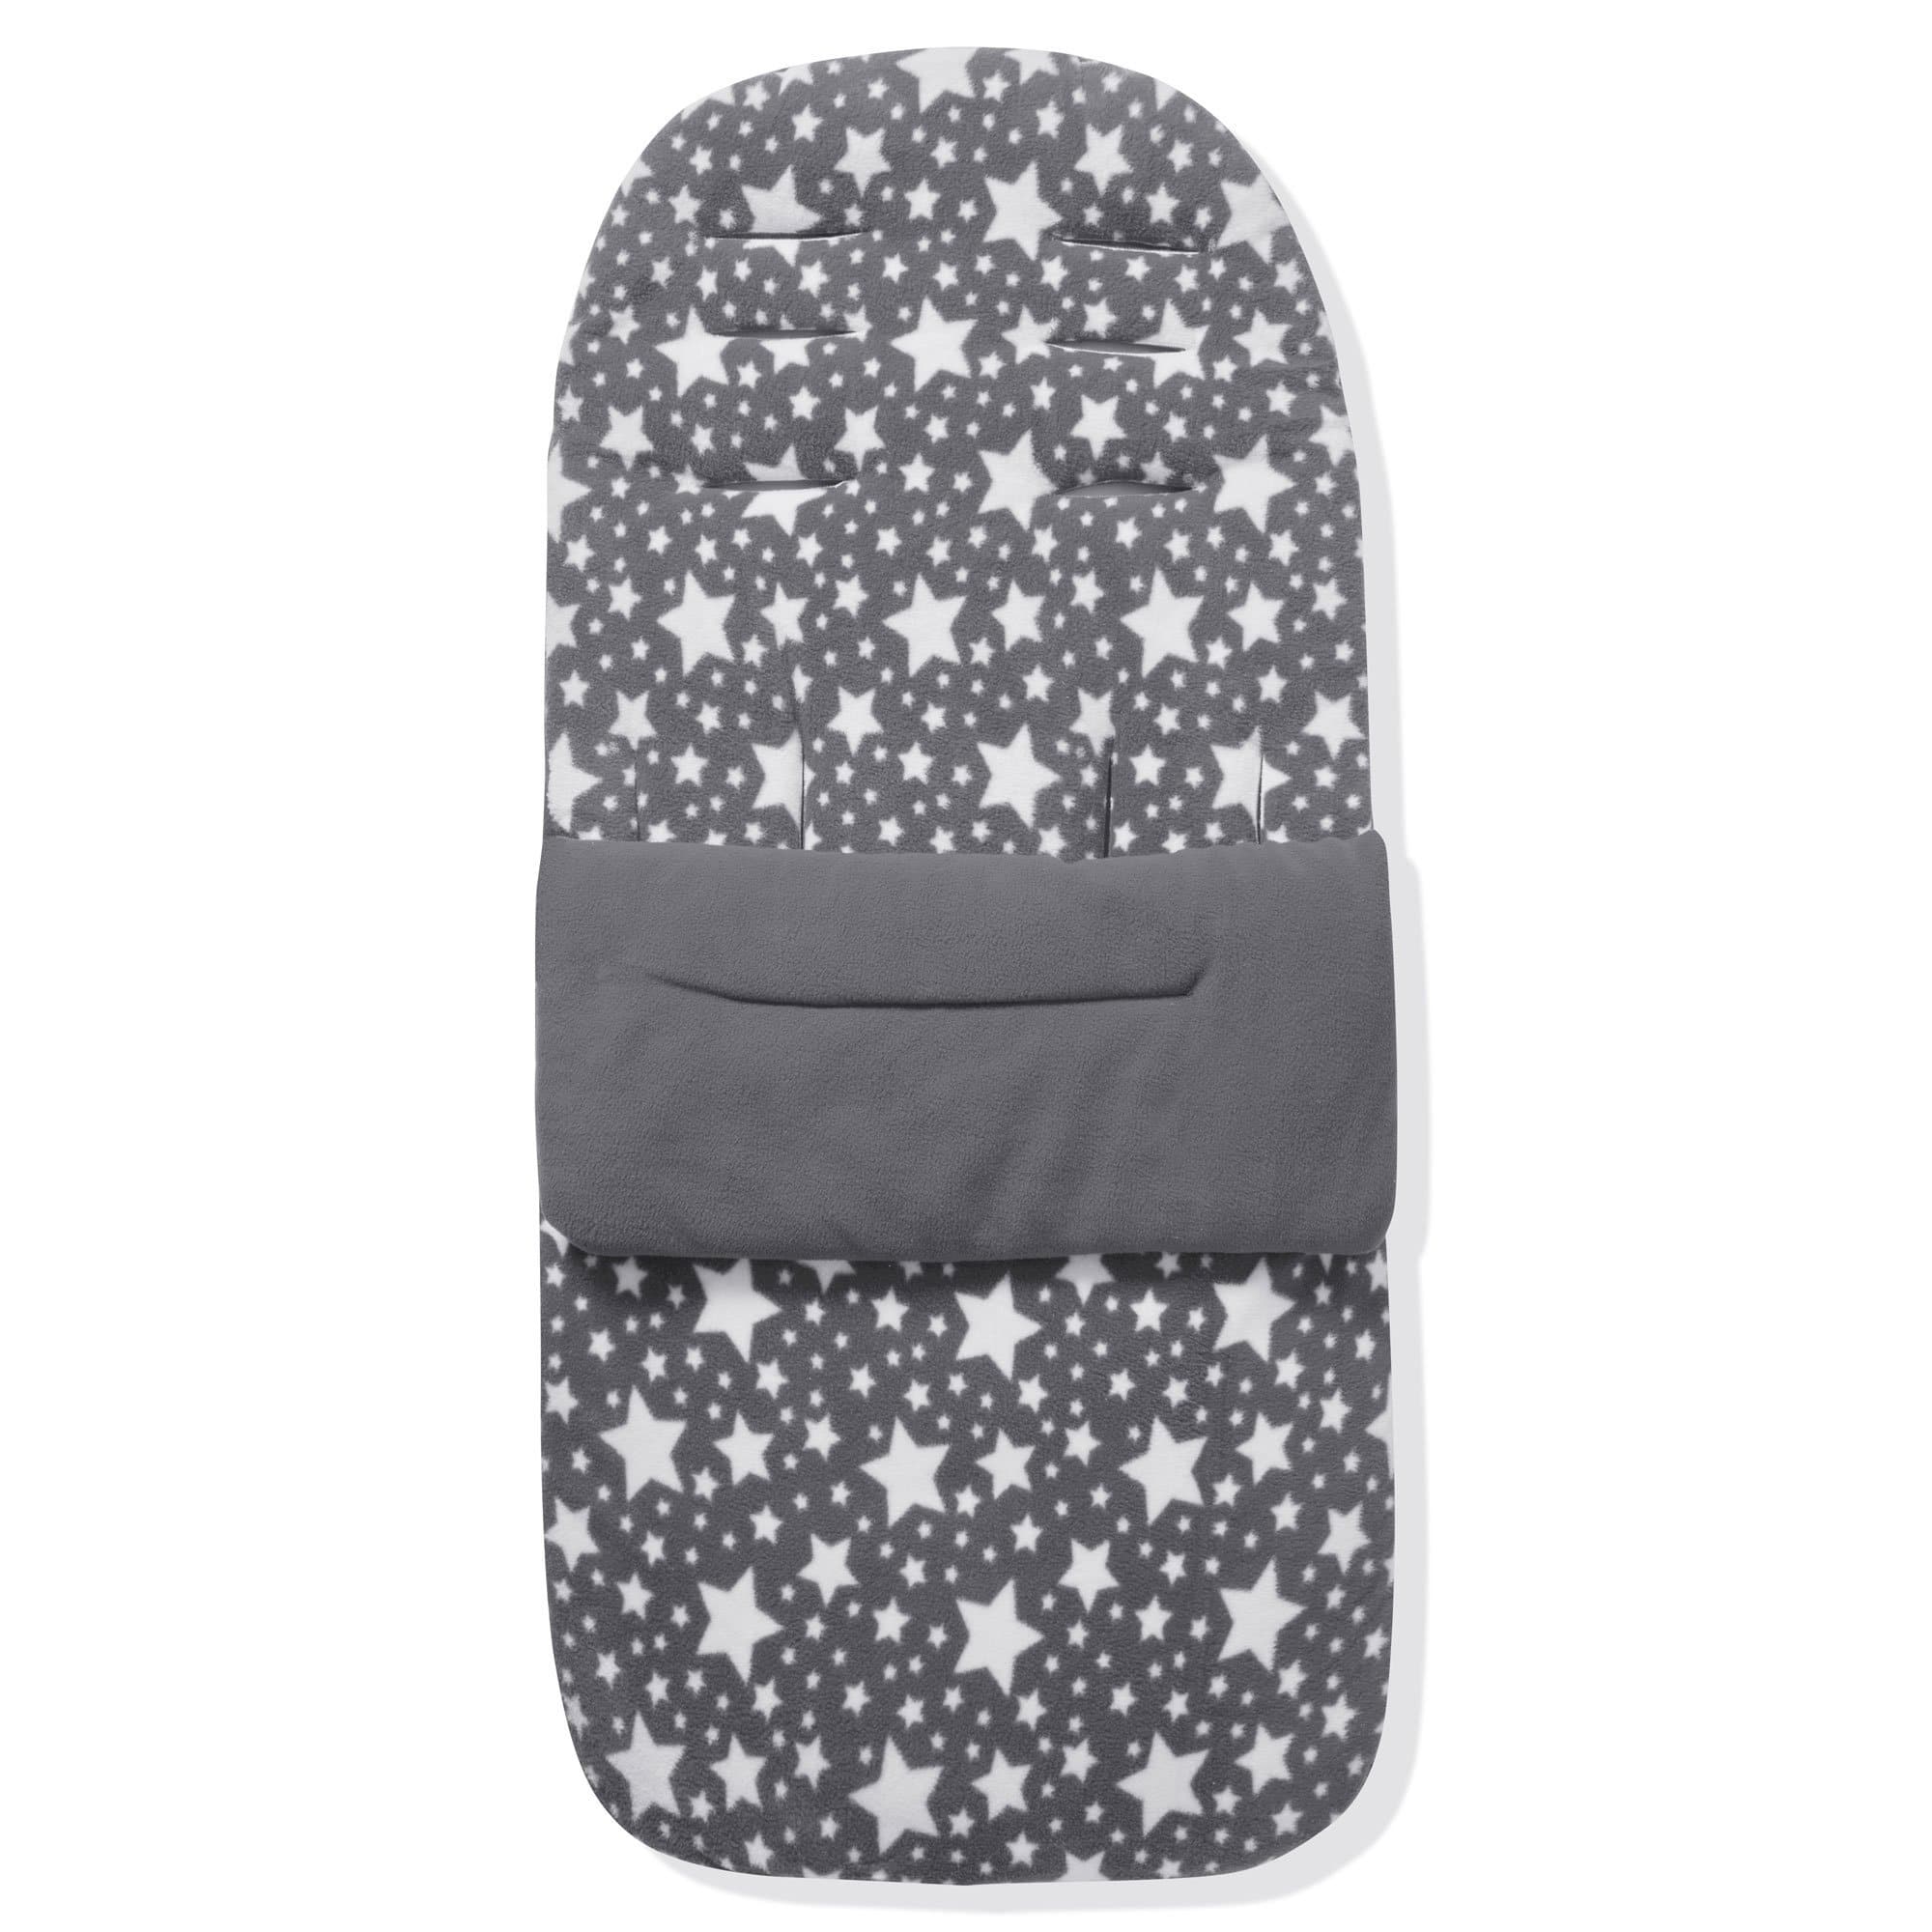 Fleece Footmuff / Cosy Toes Compatible with Babystyle - Grey Star / Fits All Models | For Your Little One